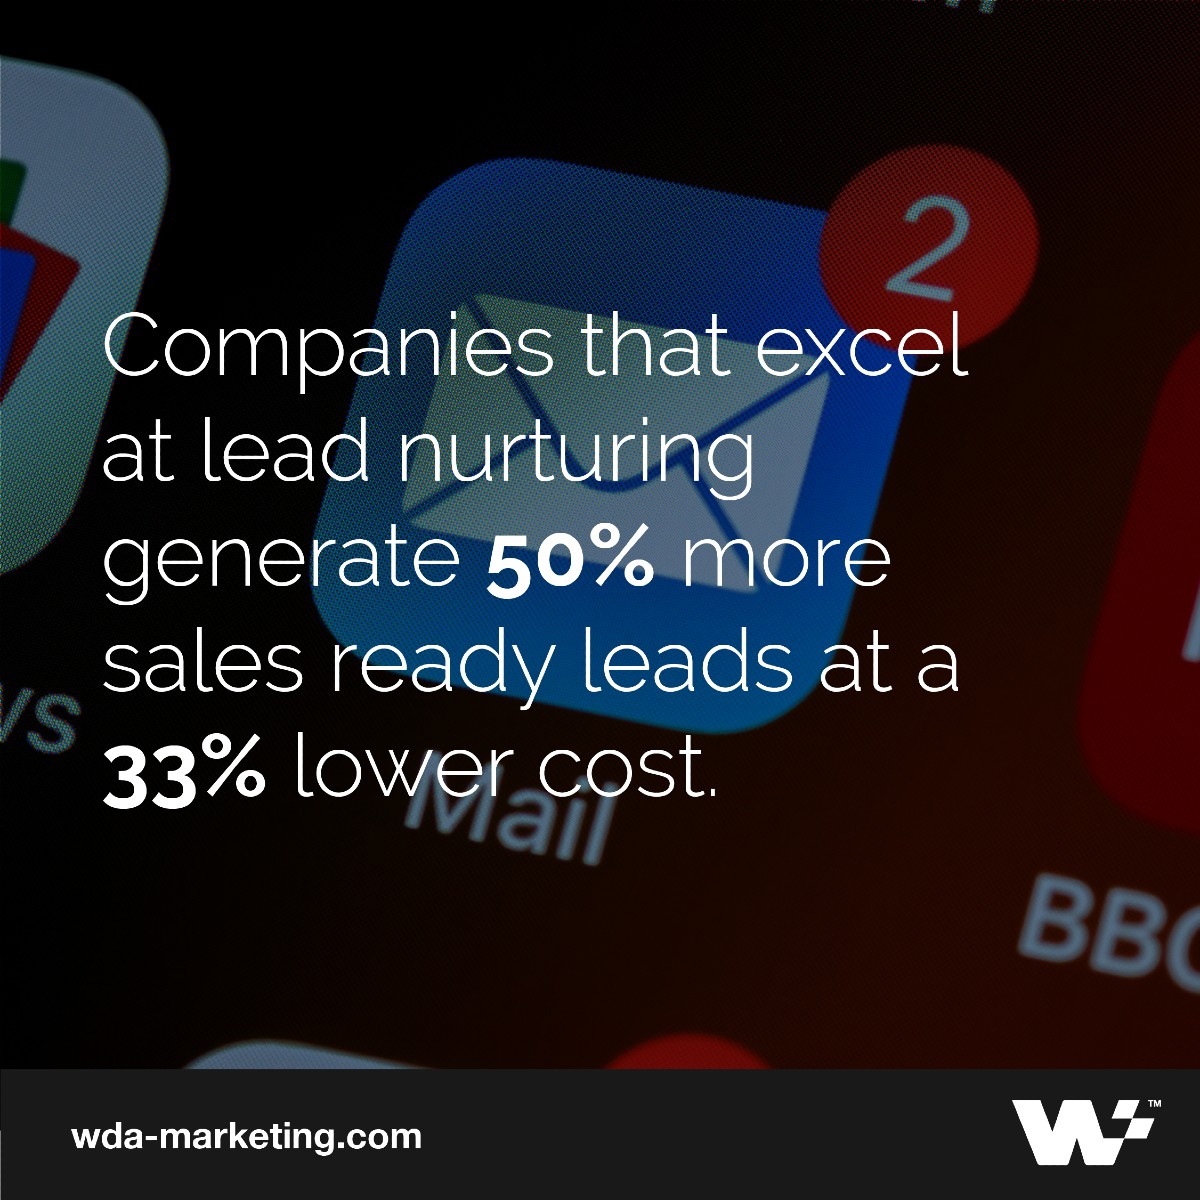 Companies that excel at lead nurturing generate 50% more sales ready leads at a 33% lower cost. 

#MarketingStats #LeadNurturing